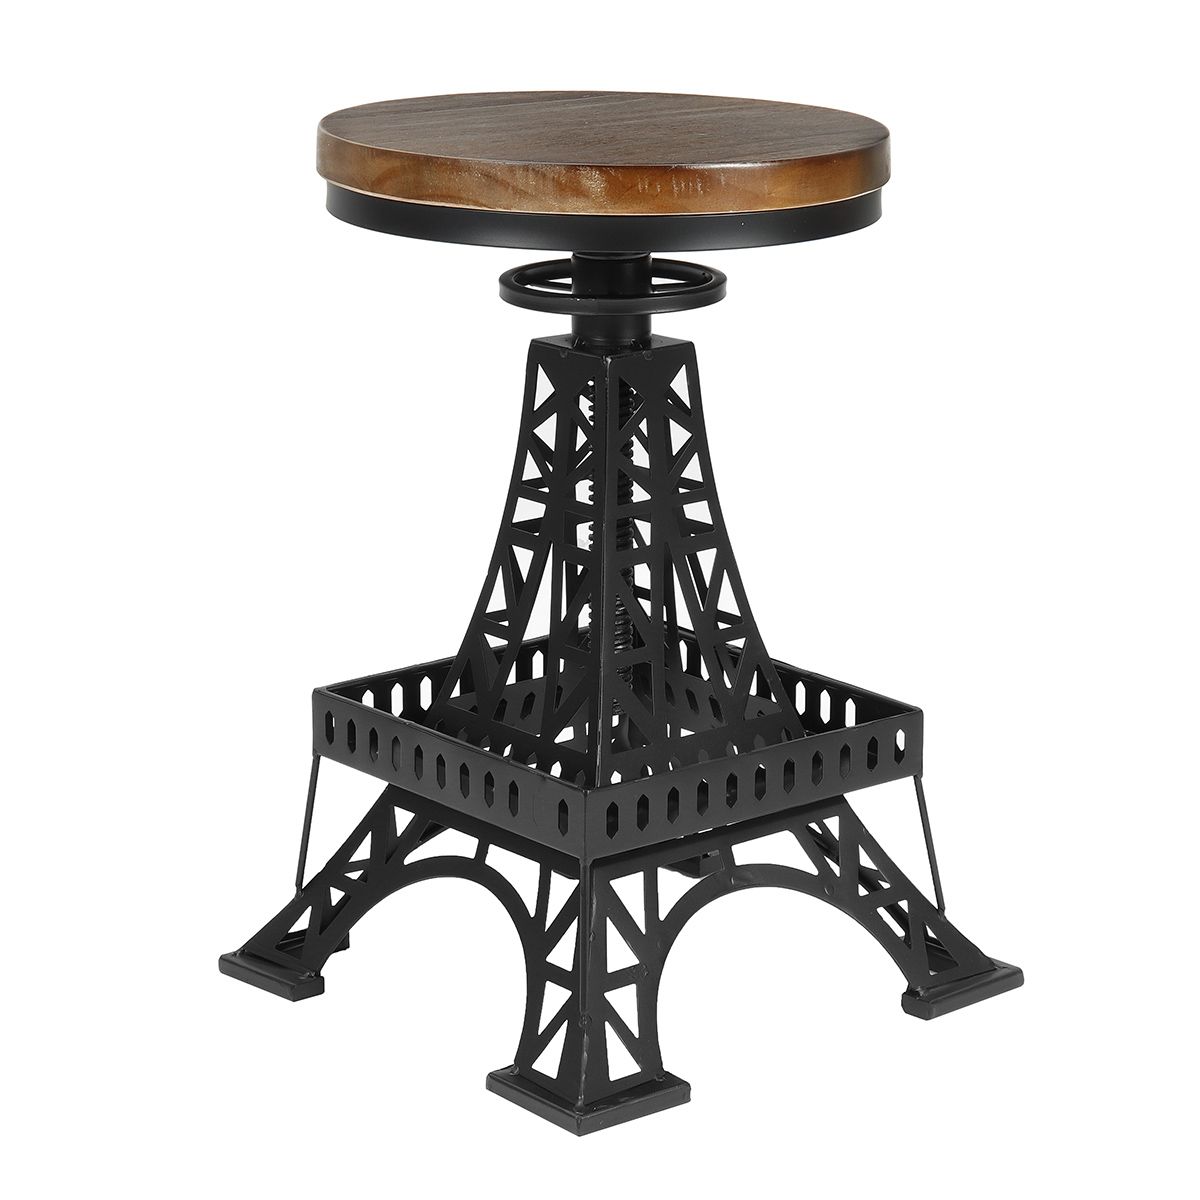 Vintage-Unique-Industrial-Iron-Tower-Metal-Black-Bar-Stool-Chair-Round-Wooden-Top-Kitchen-Side-Table-1599043